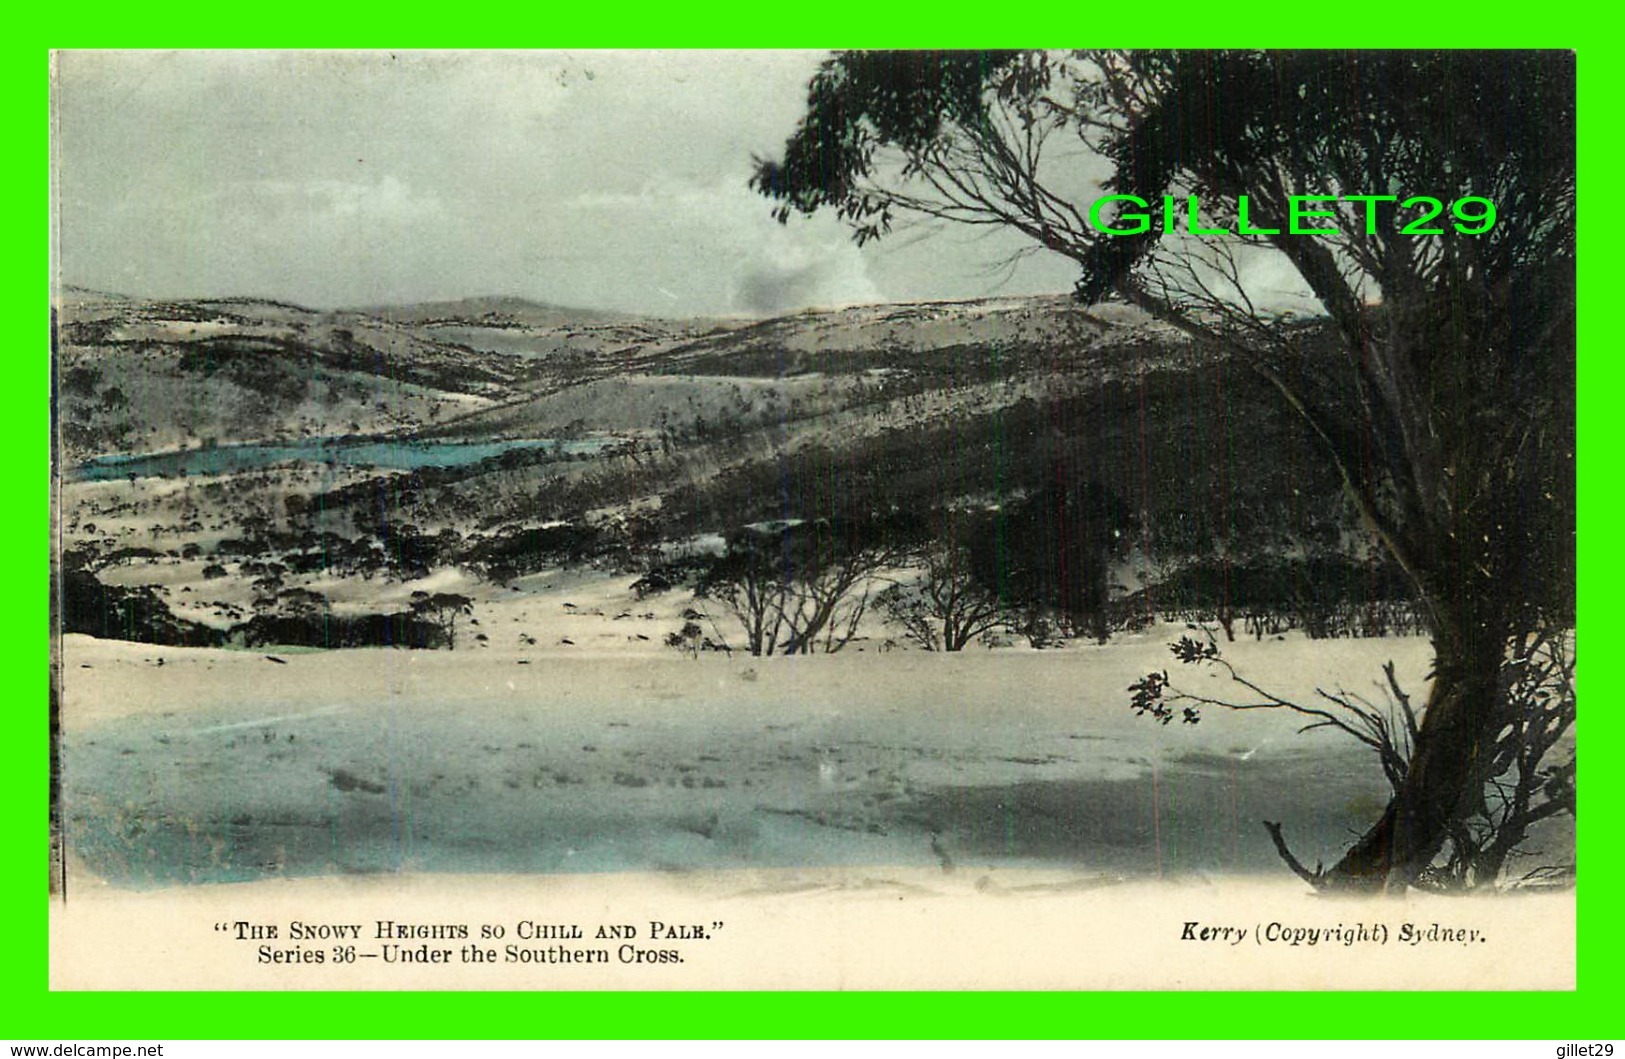 SYDNEY, AUSTRALIE - THE SNOWY HEIGHTS SO CHILL AND PALE - SERIES 36, UNDER THE SOUTHERN CROSS - KERRY - - Sydney